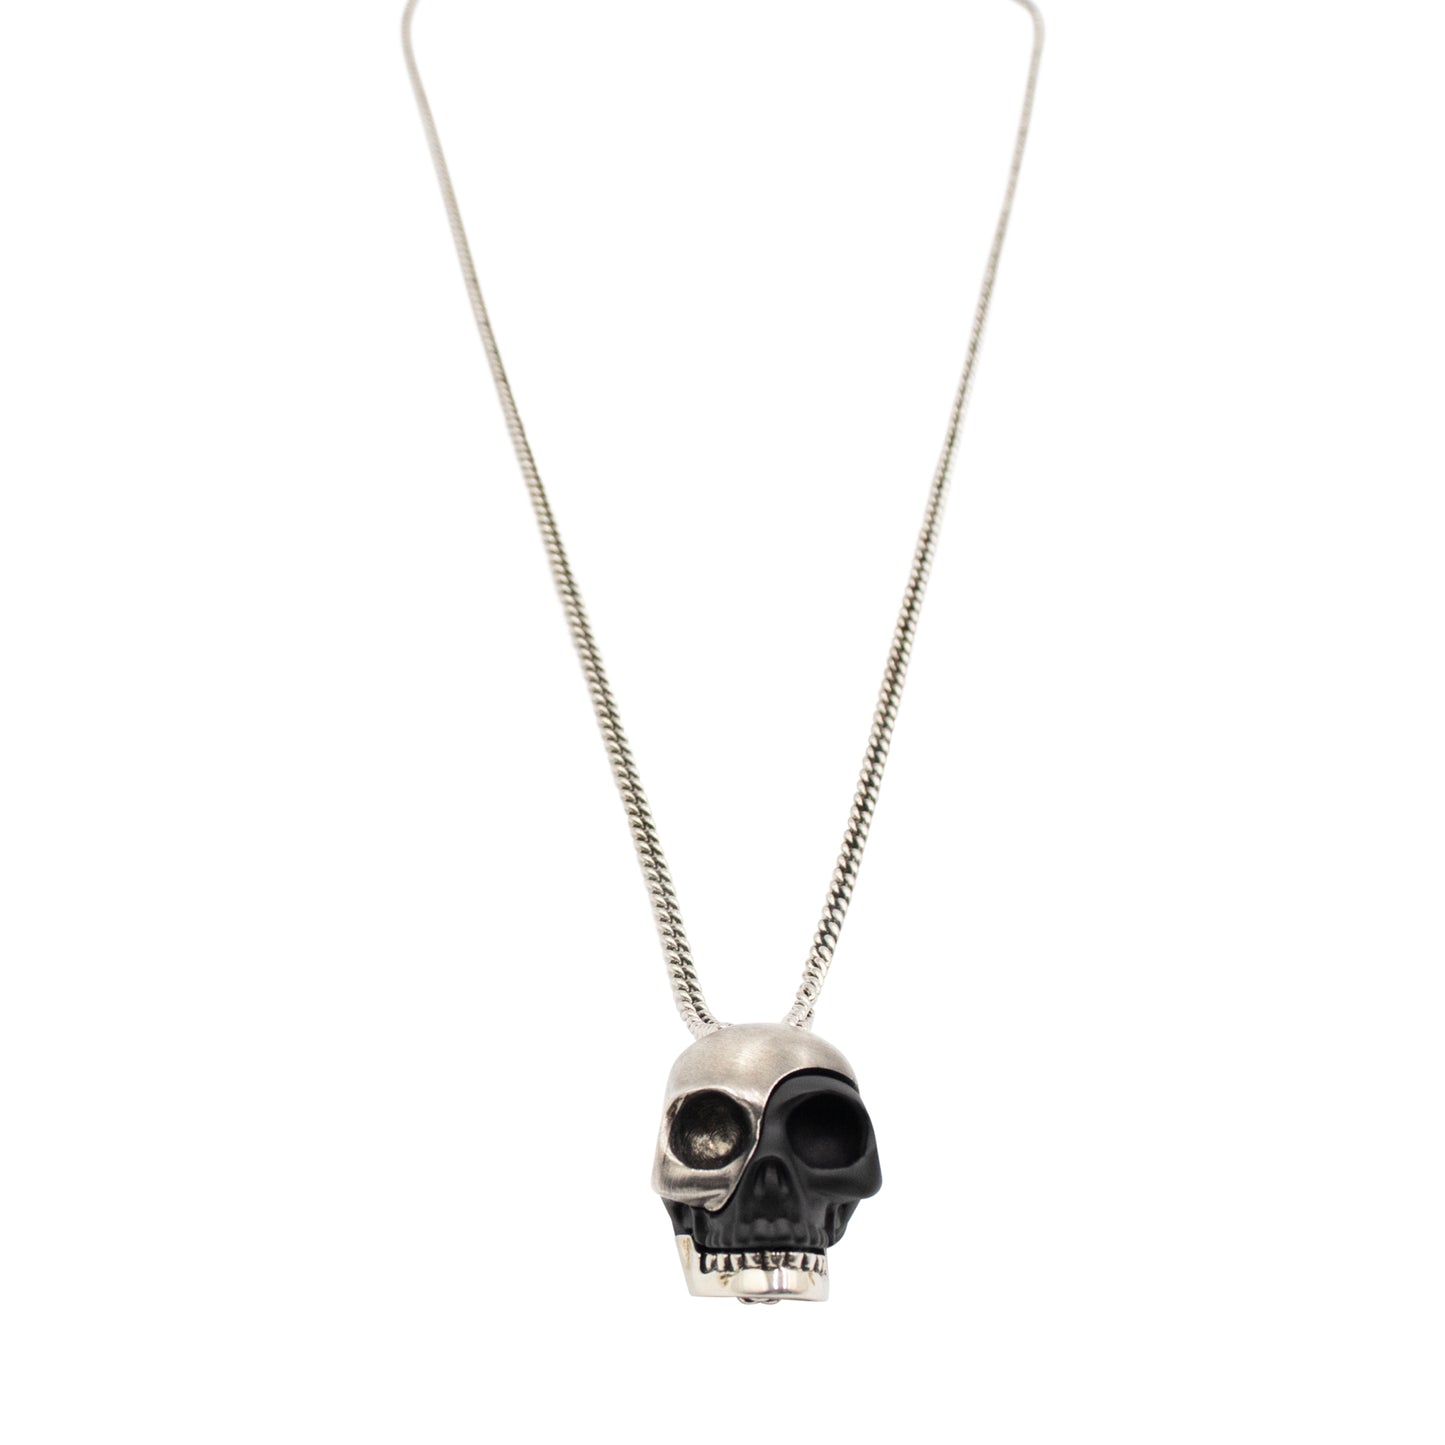 Divided Skull Pendant Necklace in Silver